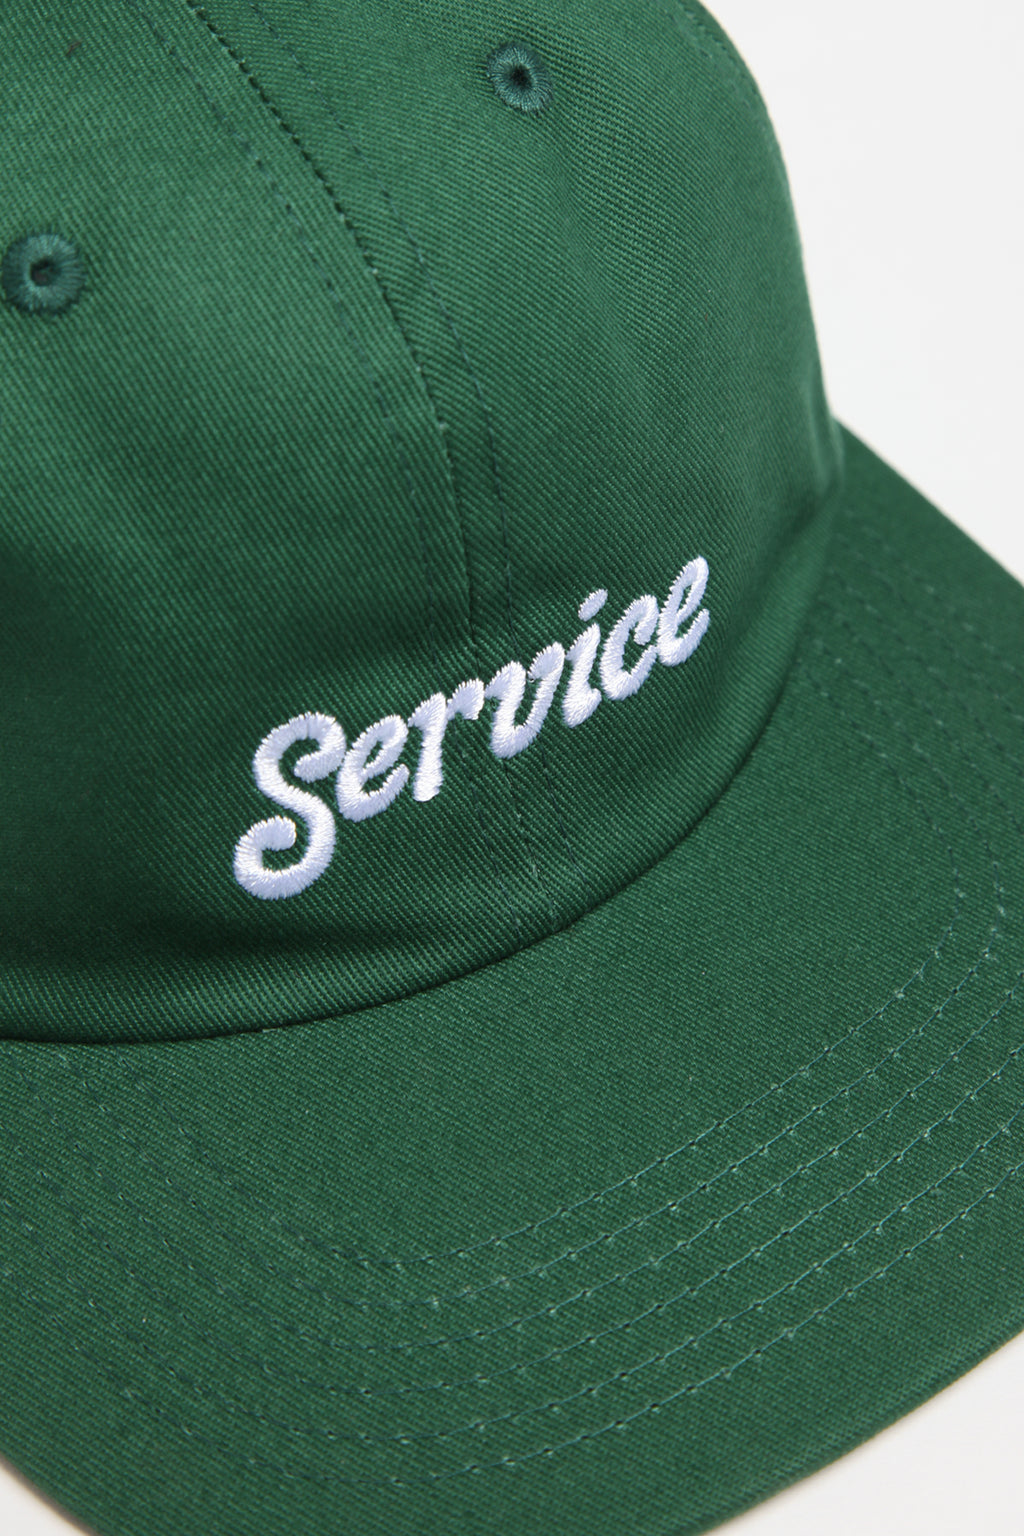 Service Works - Service Cap - Forest